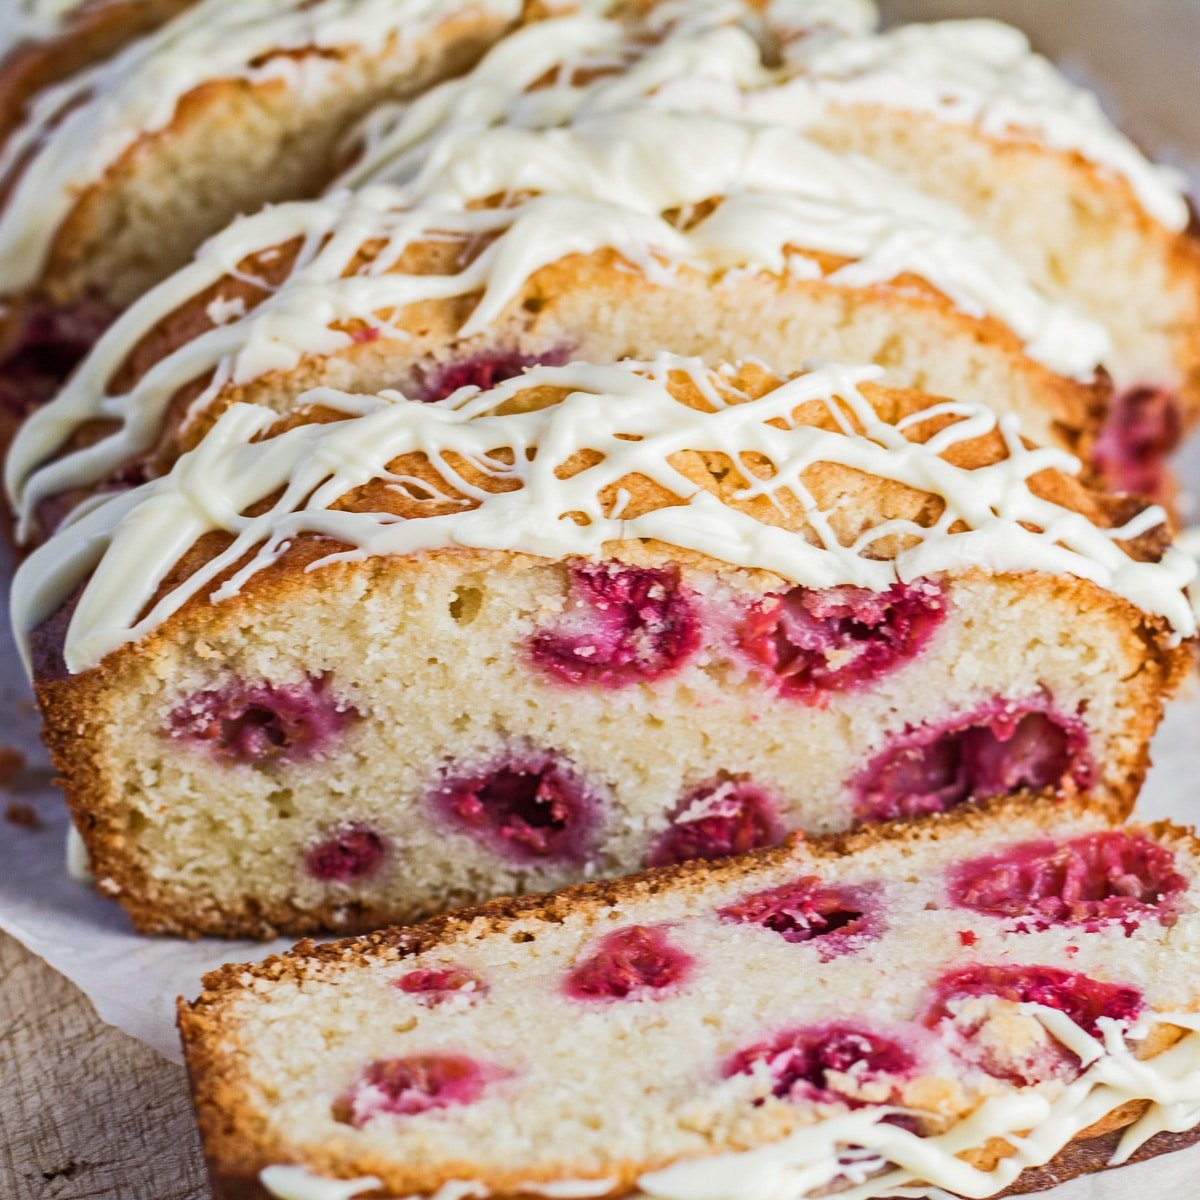 Sliced White Chocolate and Raspberry Loaf Cake with white chocolate drizzle.